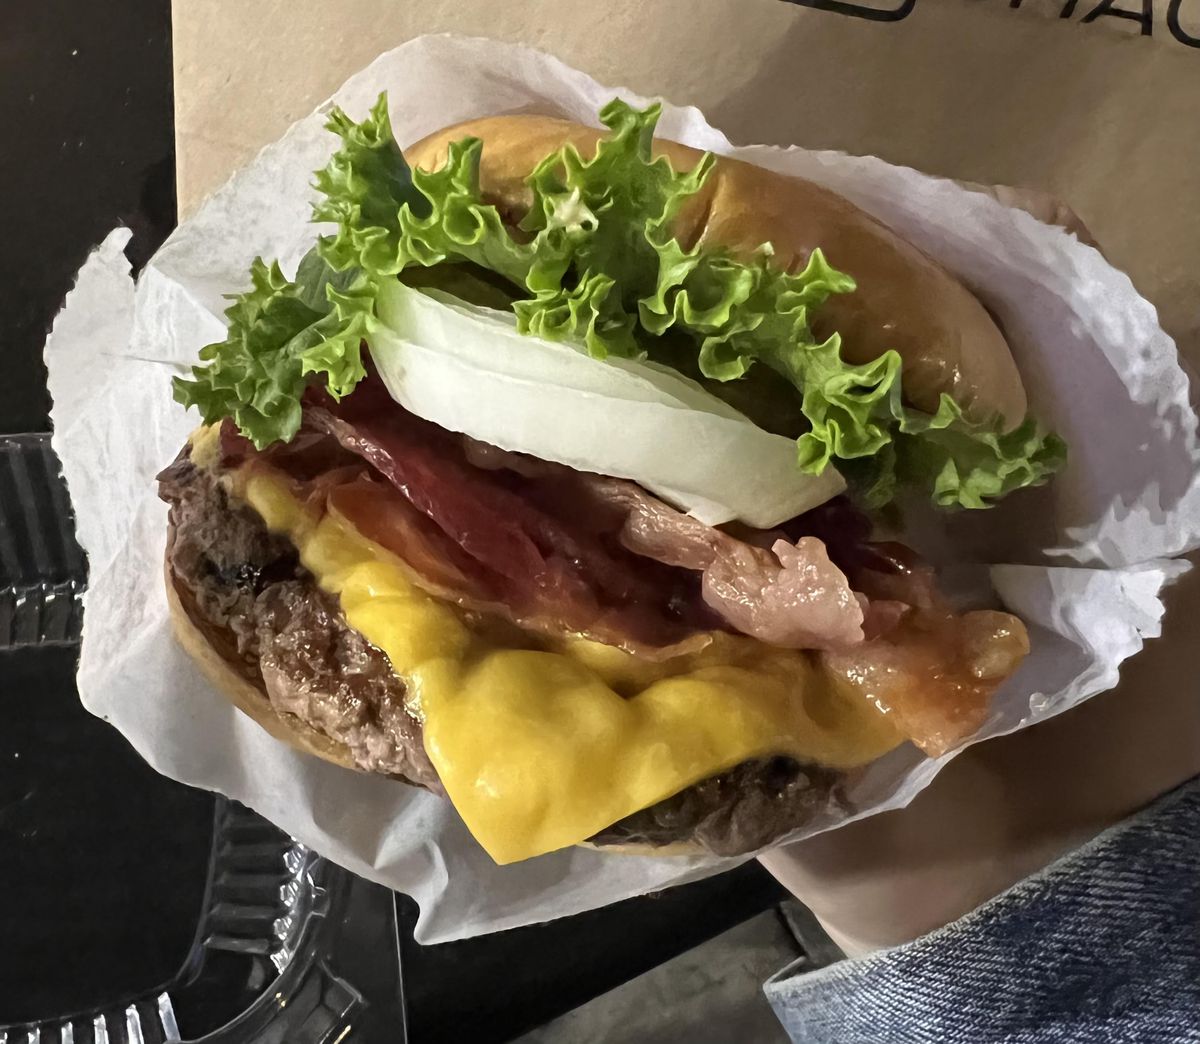 A patron is shown holding a burger in wax paper up to a camera, showing the contents of the fast food snack: white onions, yellow American cheese, bacon, and lettuce